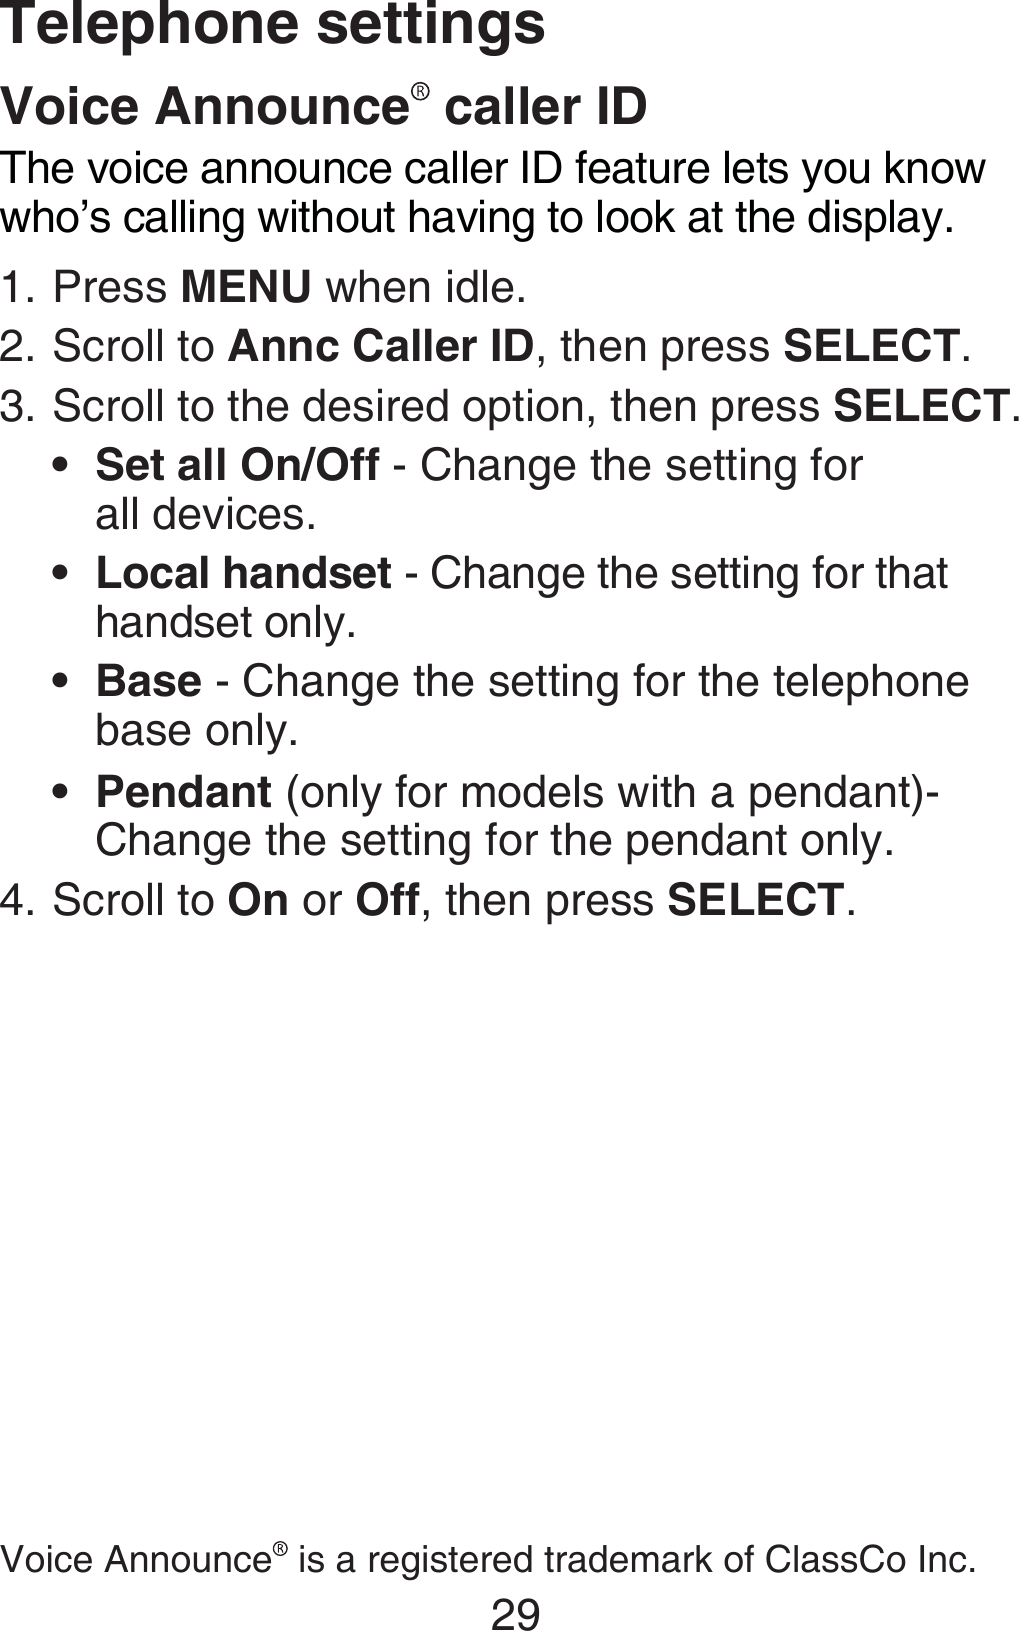 29Telephone settingsVoice Announce  caller IDThe voice announce caller ID feature lets you know who’s calling without having to look at the display. Press MENU when idle.Scroll to Annc Caller ID, then press SELECT. Scroll to the desired option, then press SELECT.Set all On/Off - Change the setting for  all devices.Local handset - Change the setting for that handset only.Base - Change the setting for the telephone base only.Pendant (only for models with a pendant)- Change the setting for the pendant only.Scroll to On or Off, then press SELECT.1.2.3.••••4.Voice Announce  is a registered trademark of ClassCo Inc.